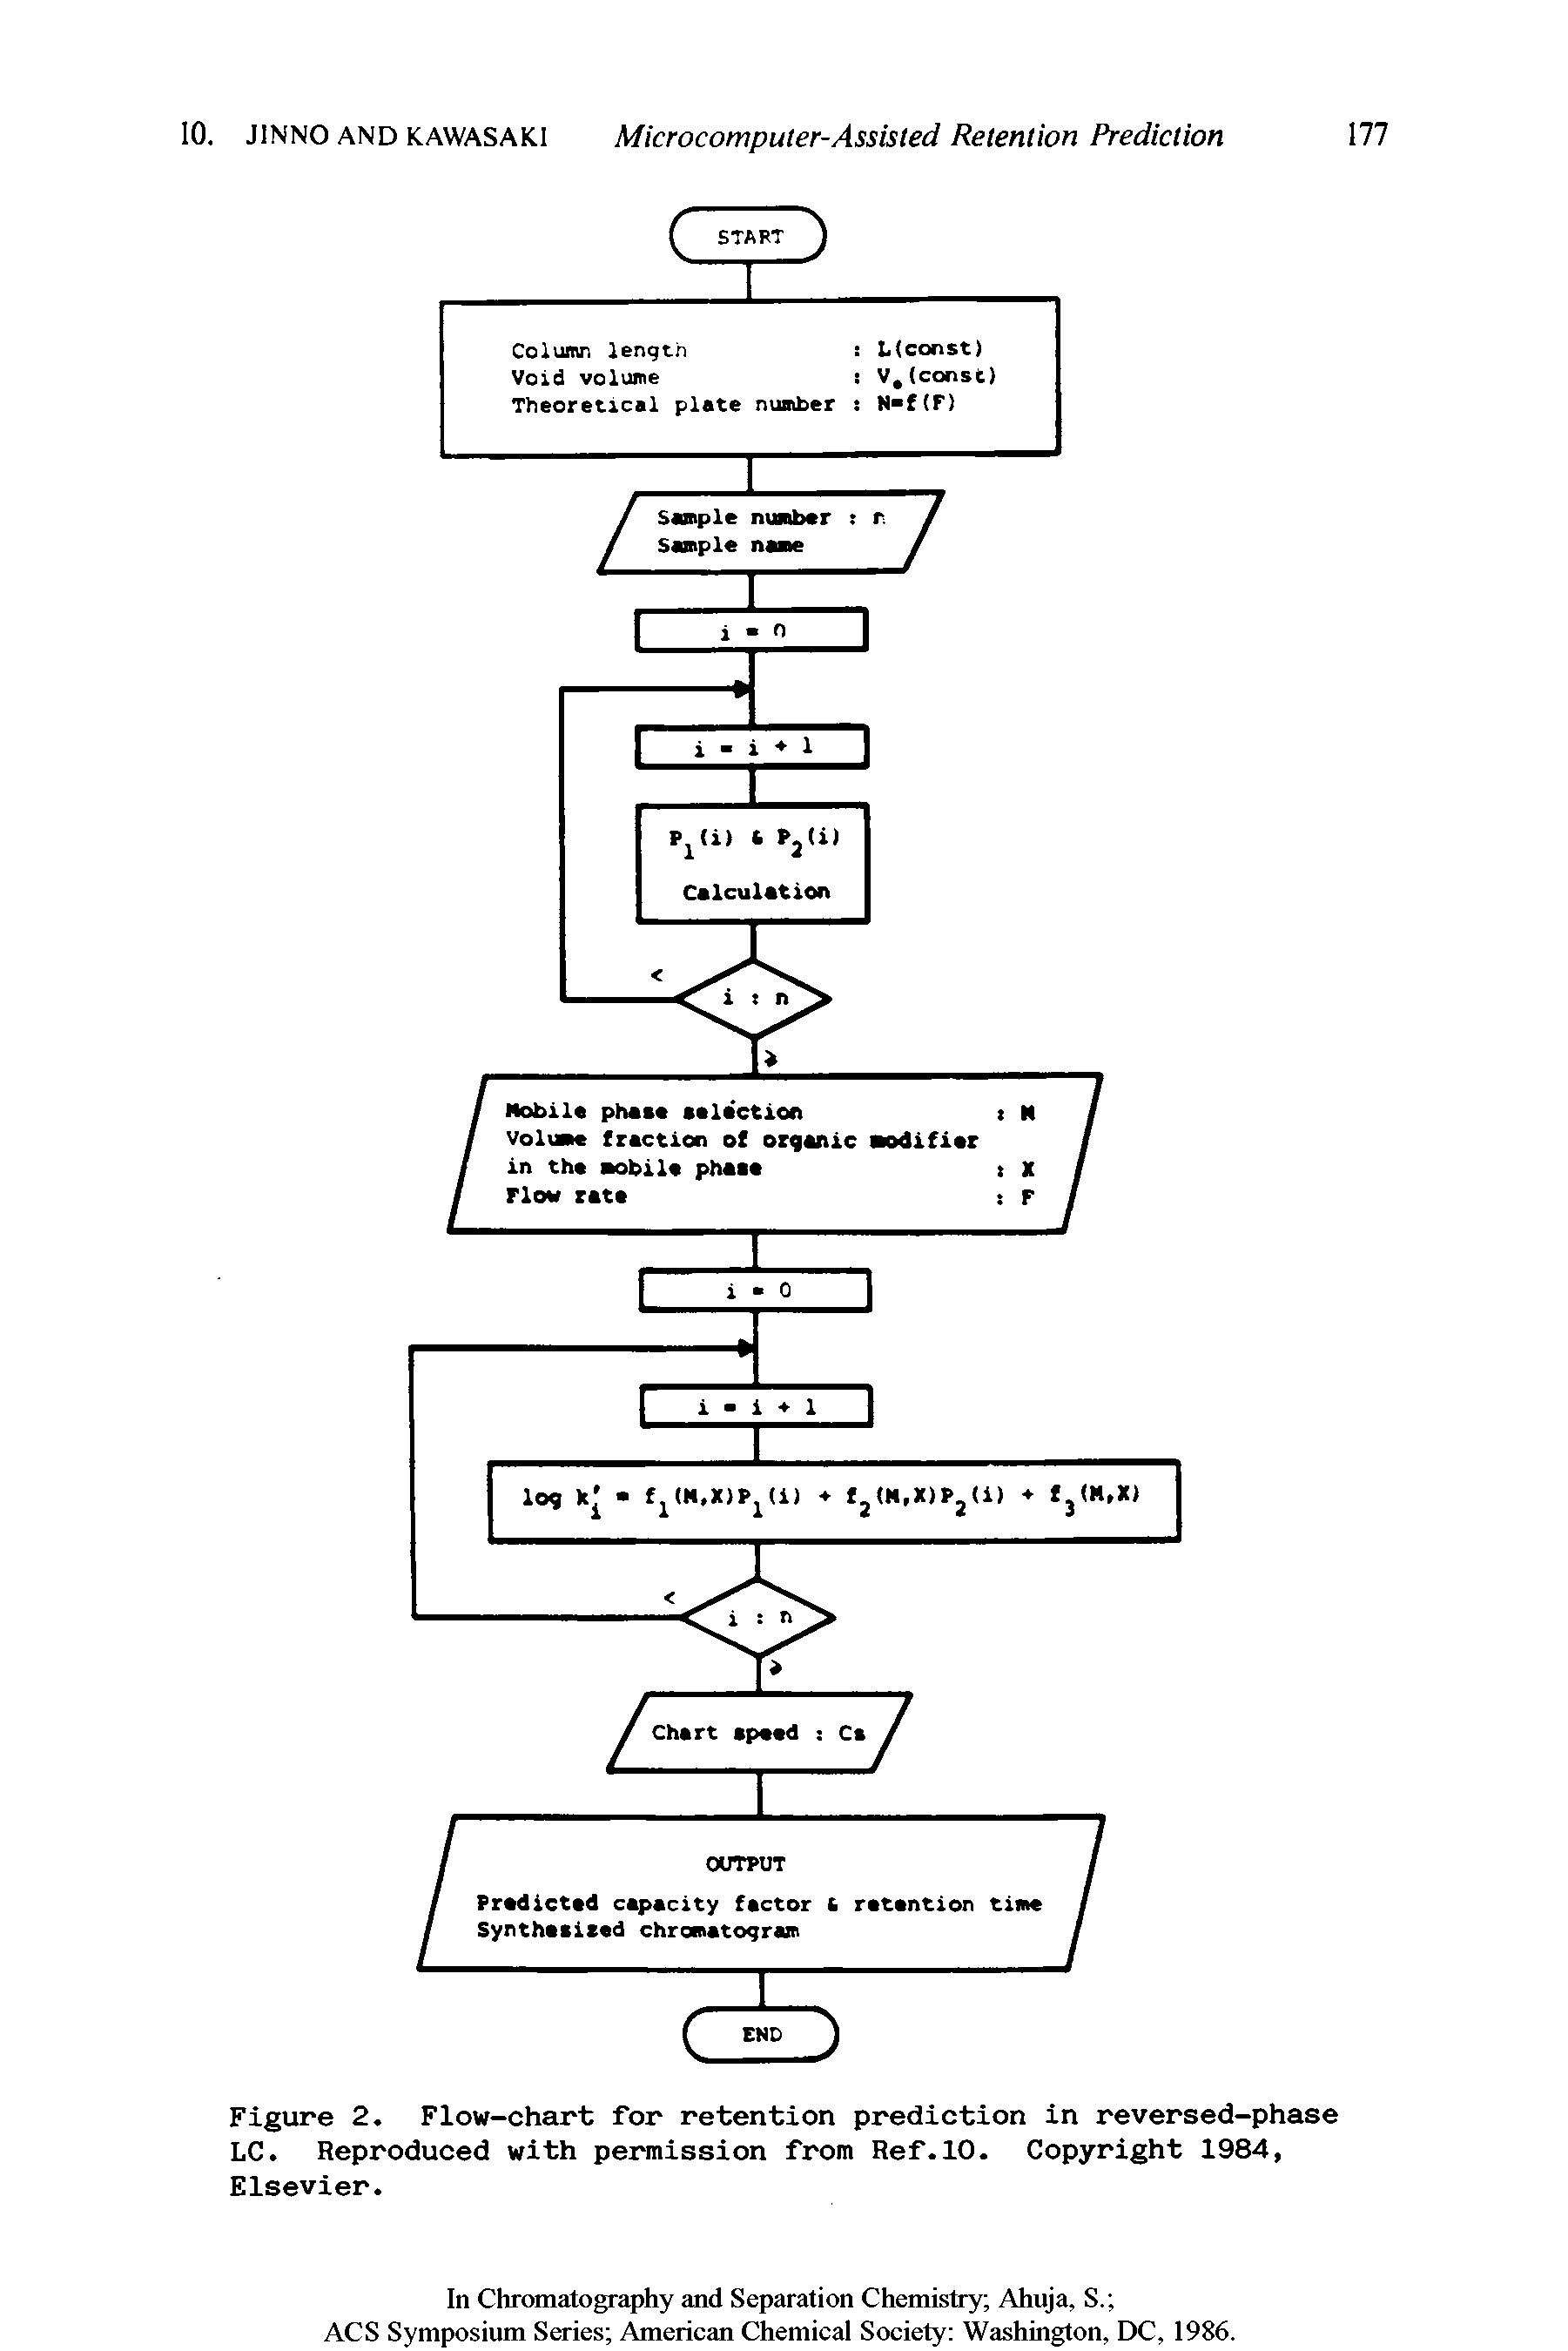 Figure 2. Flow-chart for retention prediction in reversed-phase LC. Reproduced with permission from Ref. 10. Copyright 1984, Elsevier.